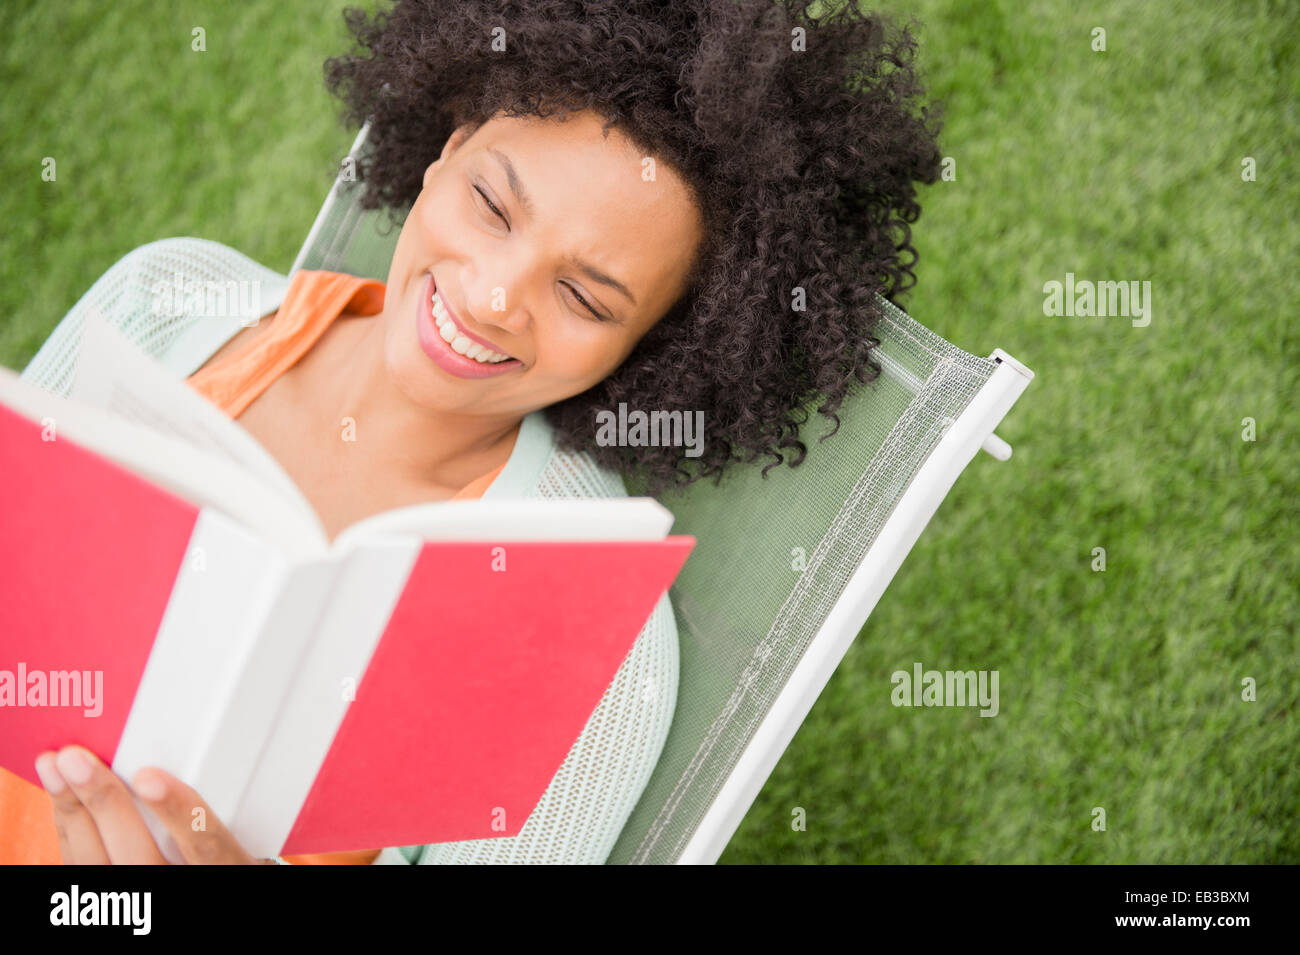 High angle view of woman reading book in chair outdoors Stock Photo